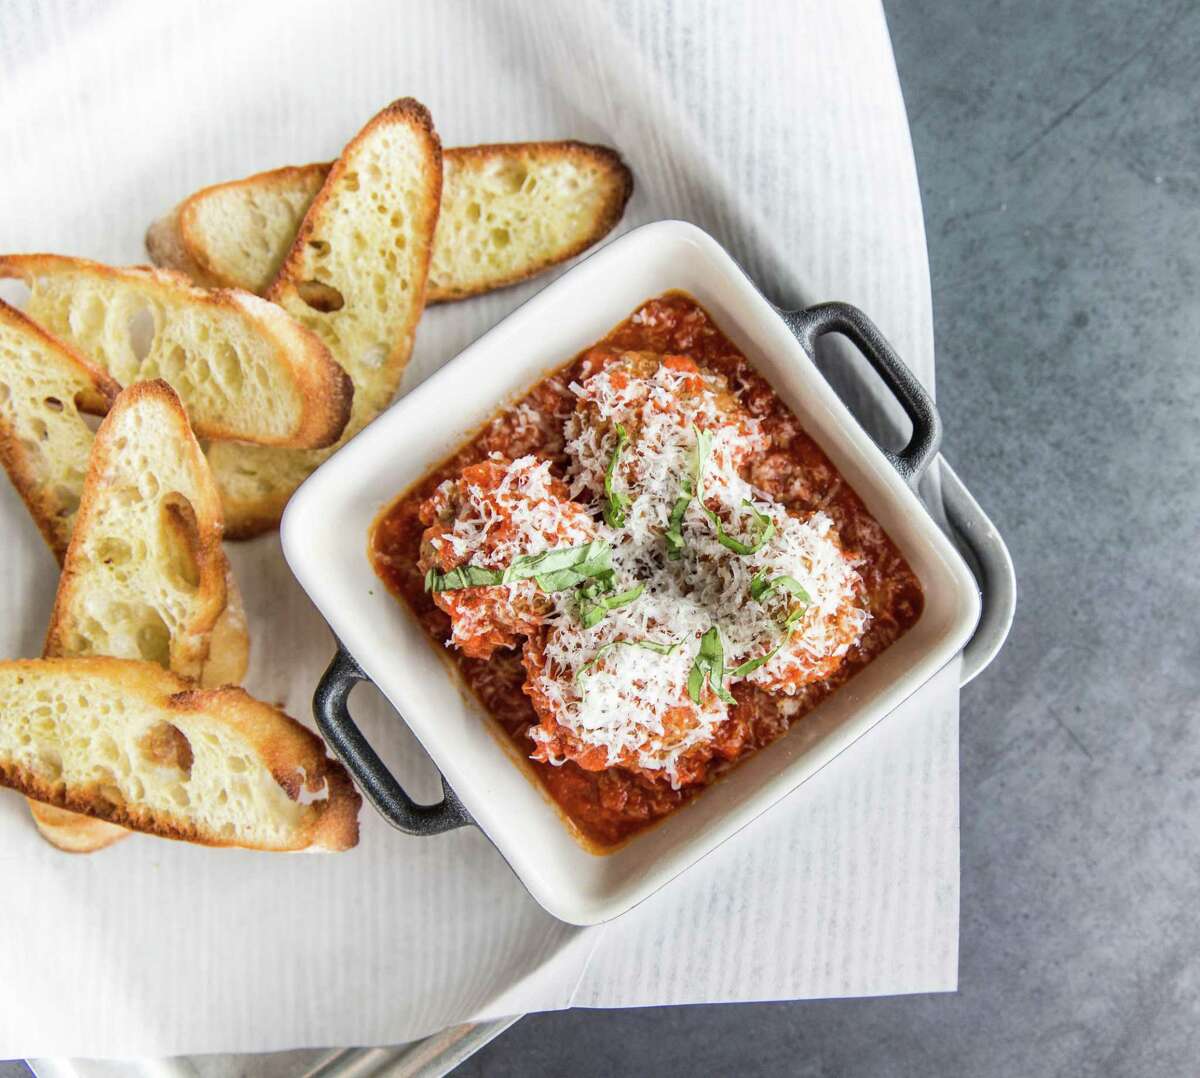 Damian's Cucina Italiana will host the Meatball Brawl, a competition  to determine Houston's best meatballs on April 23 from 1 to 4 p.m. at Damian's, 3011 Smith. Shown:  Pi Pizza meatballs.